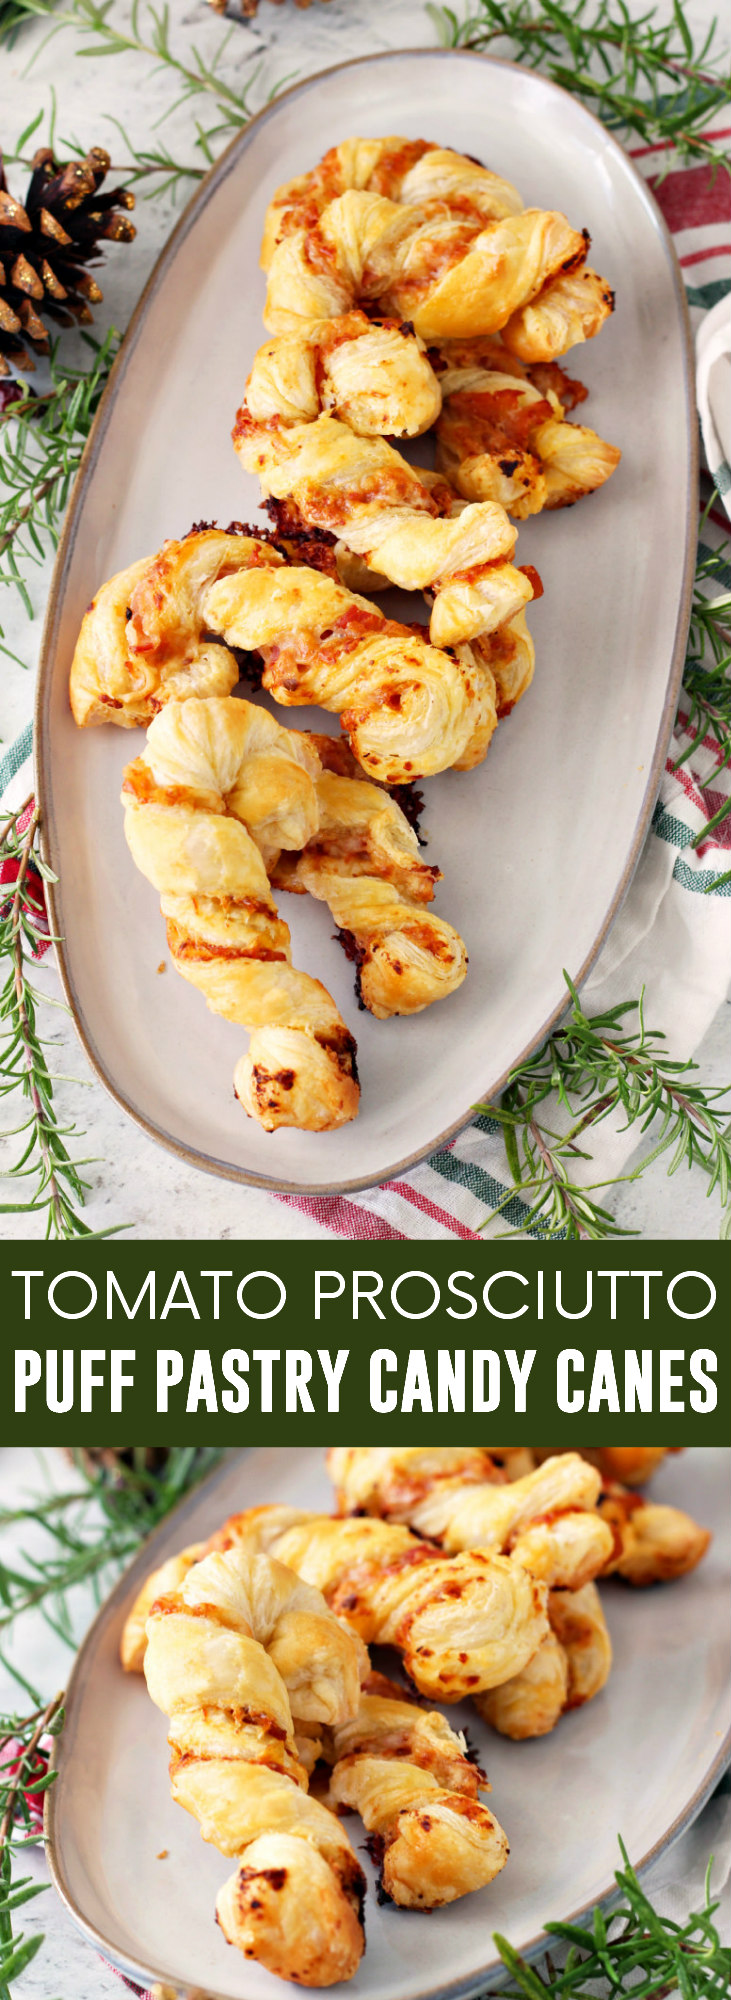 Tomato Prosciutto Puff Pastry Candy Canes pinnable image.